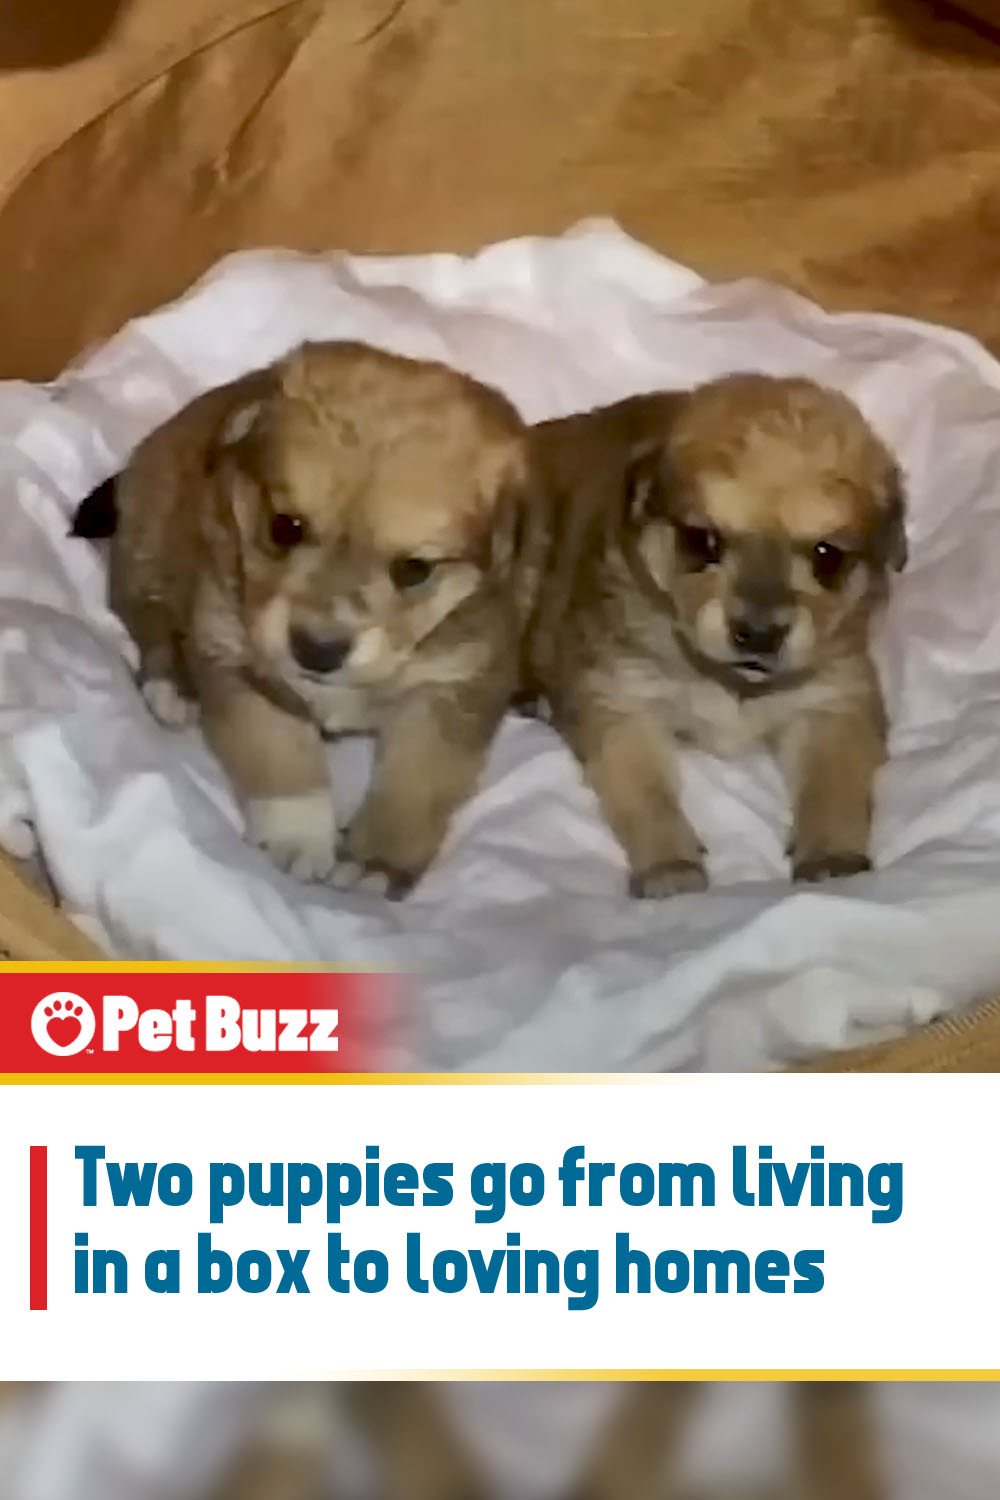 Two puppies go from living in a box to loving homes